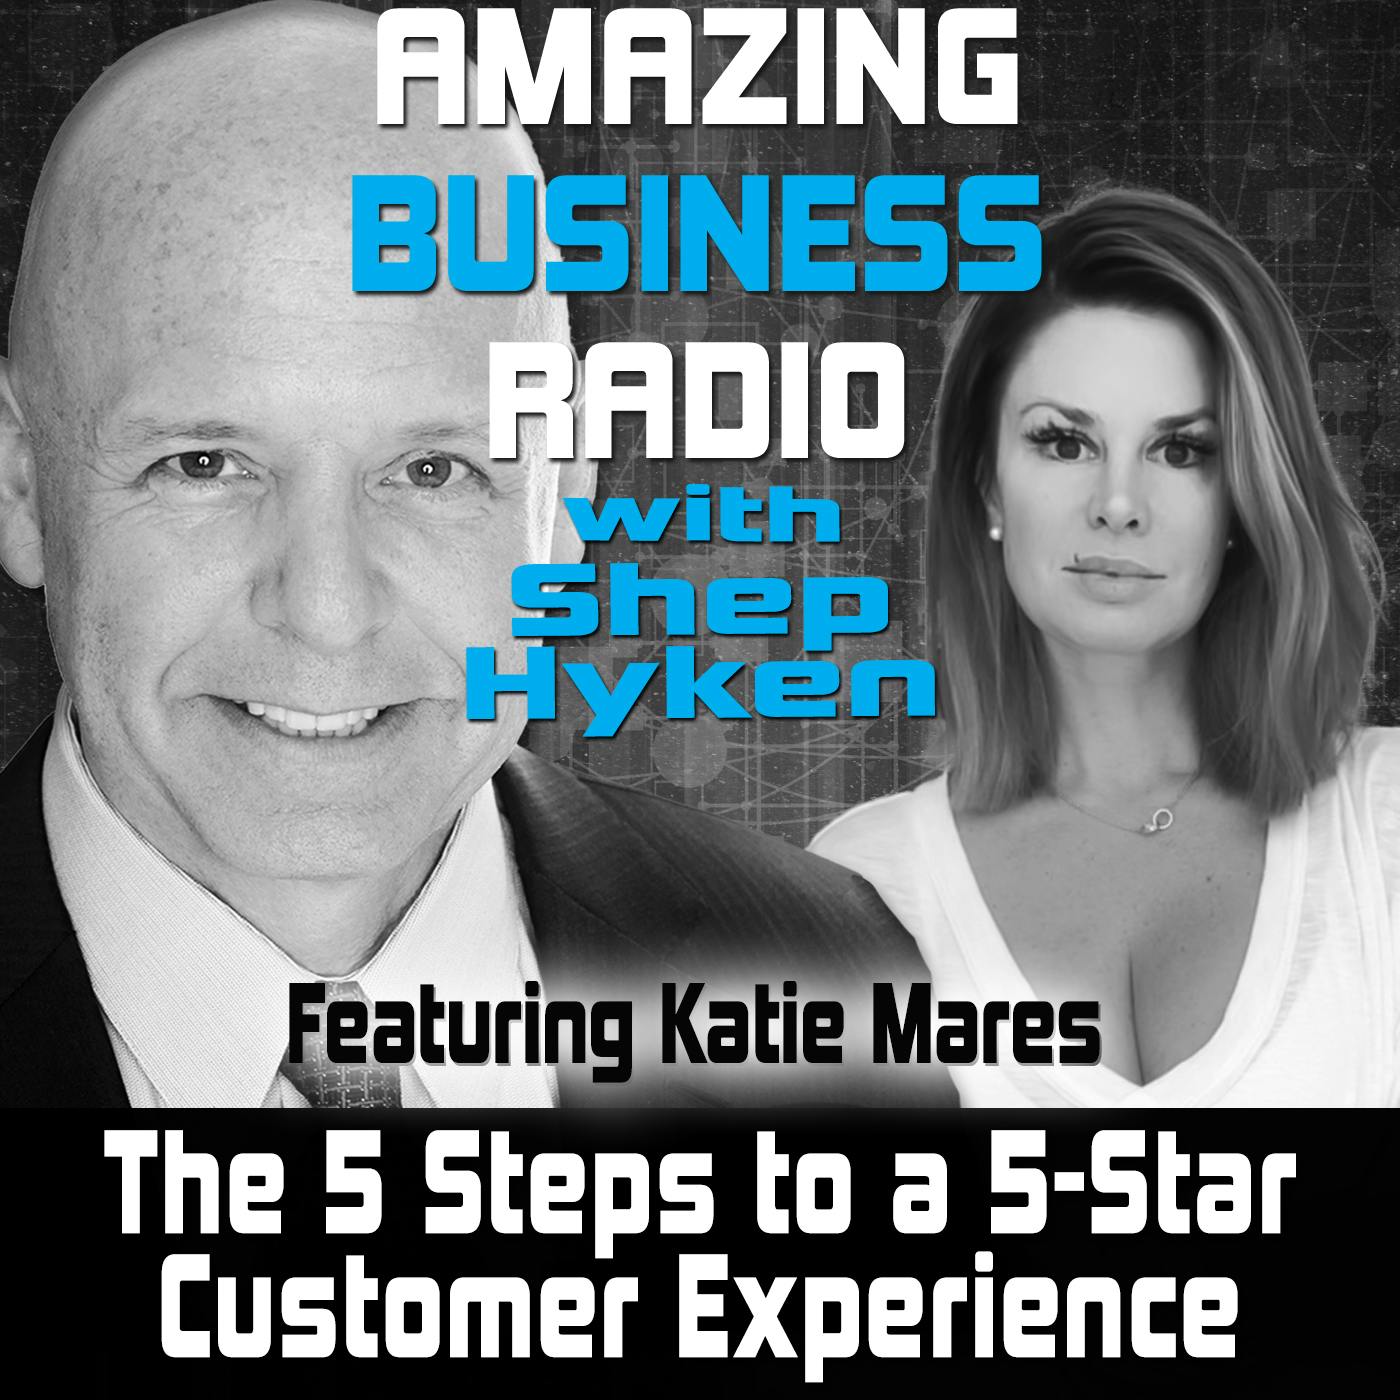 The 5 Steps to a 5-Star Customer Experience Featuring Katie Mares